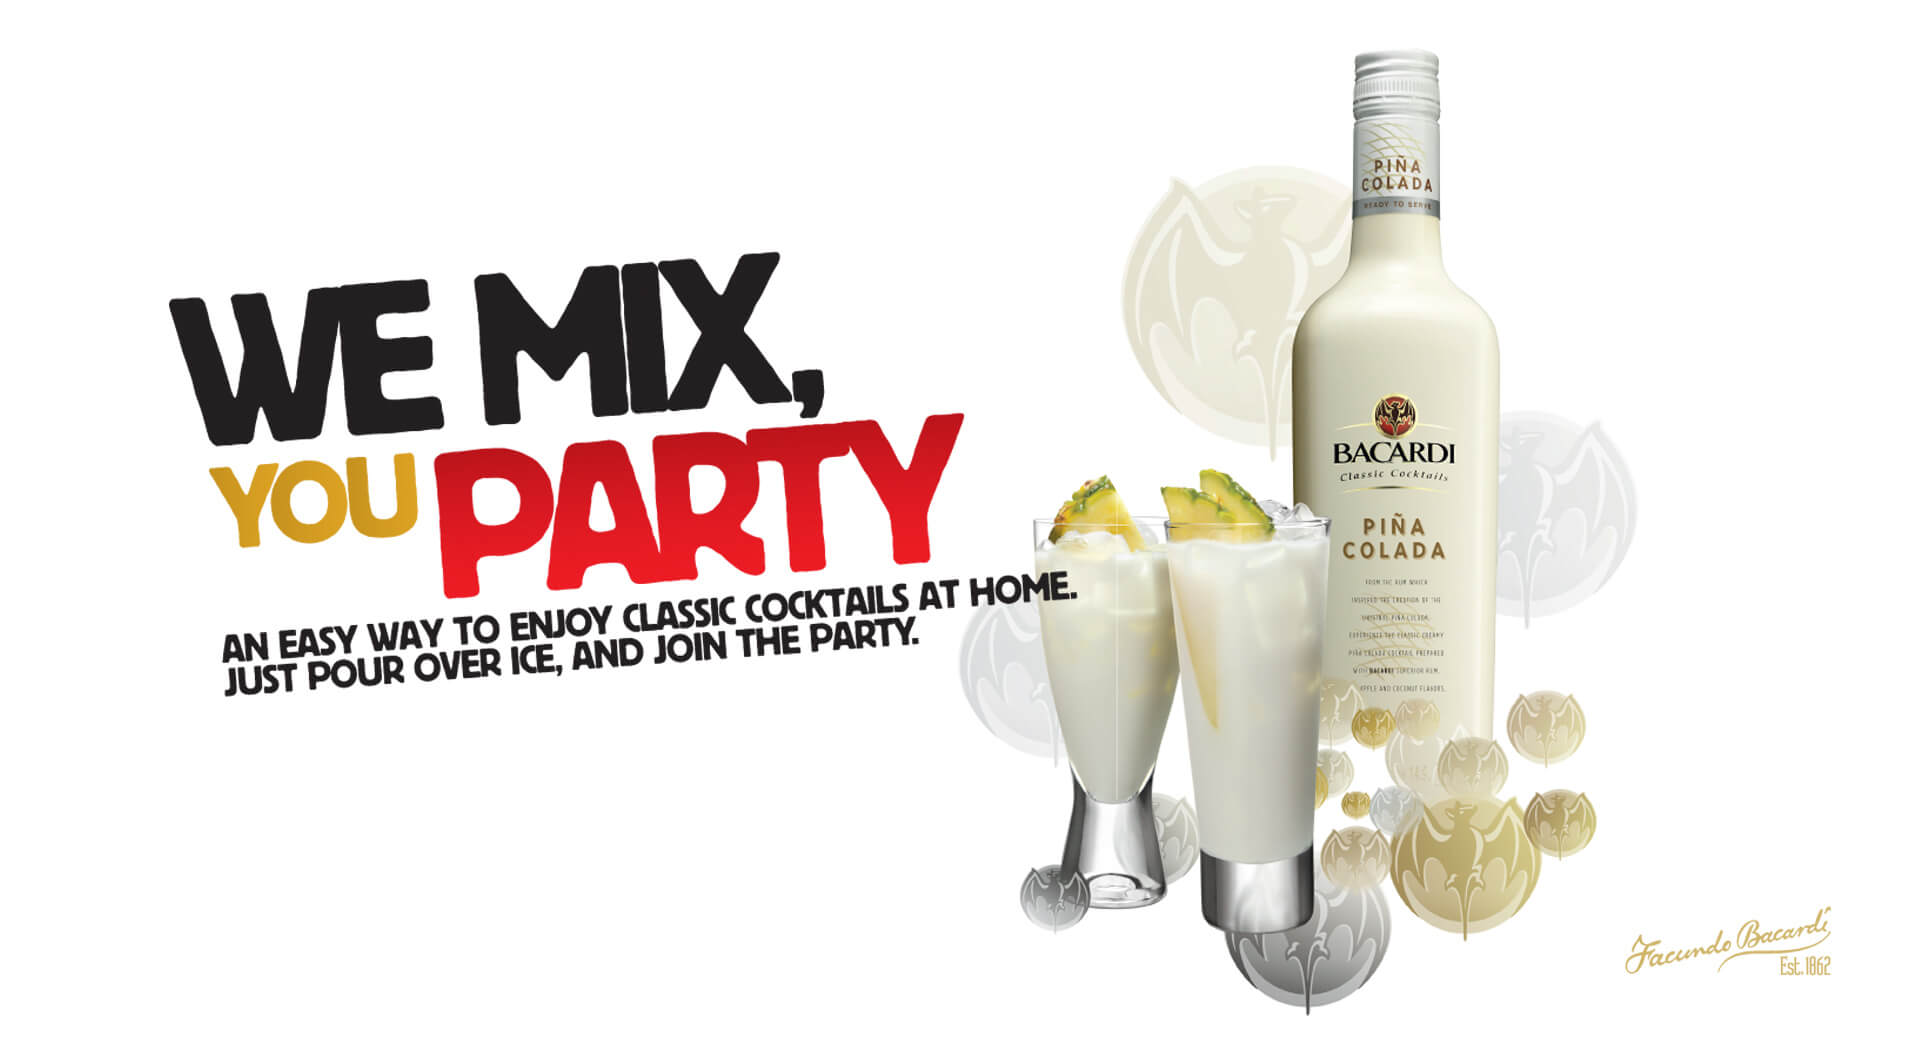 Bacardi we mix you party brand identity duty free promotion campaigns for travel retail airport design